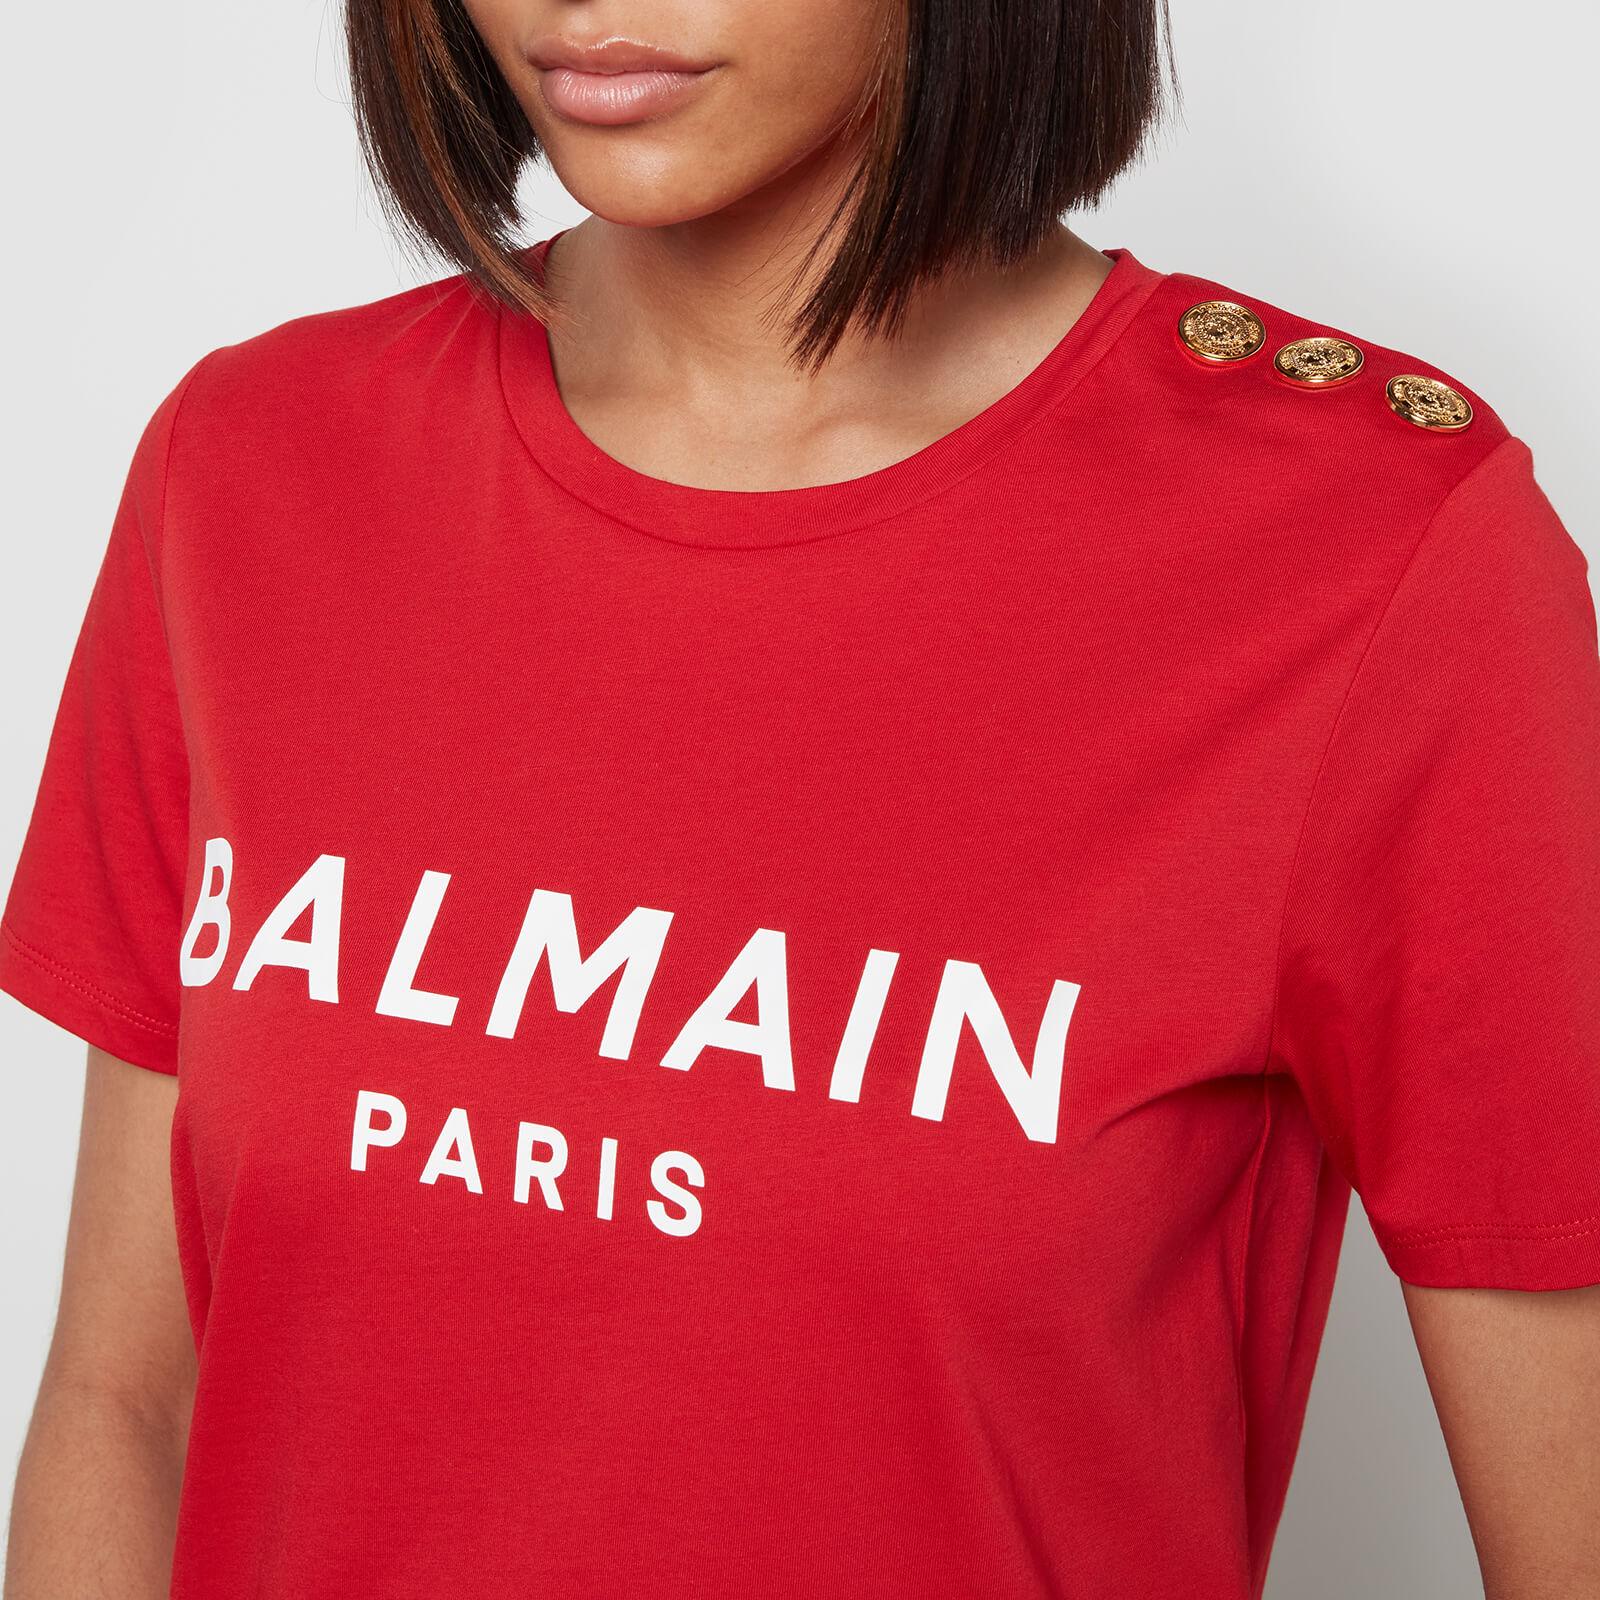 Balmain Short Sleeve 3 Button Printed T-shirt in Red | Lyst Canada